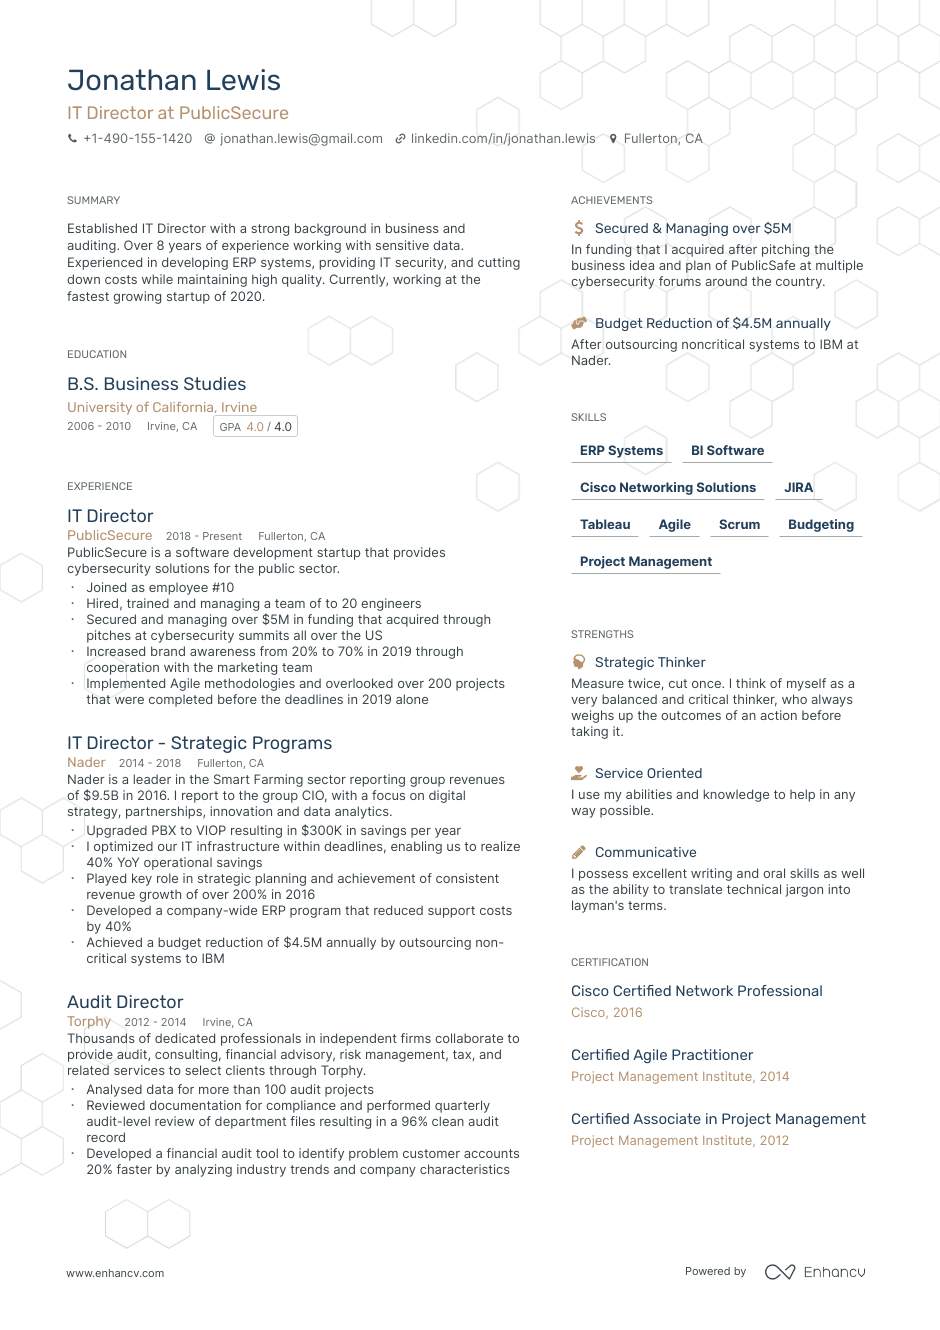 Single page IT director resume